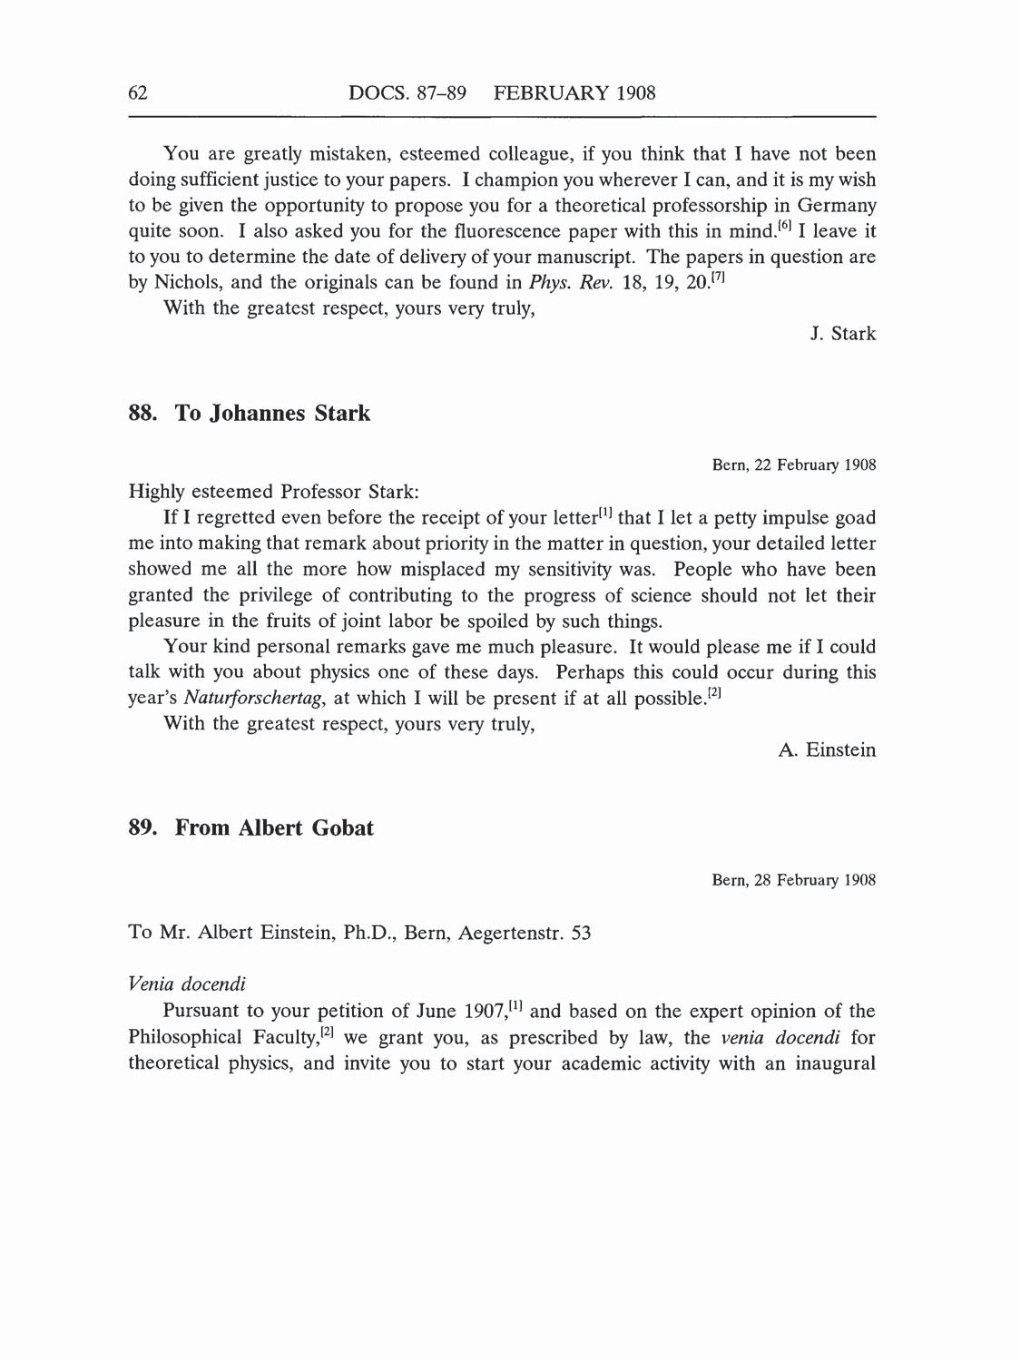 Volume 5: The Swiss Years: Correspondence, 1902-1914 (English translation supplement) page 62